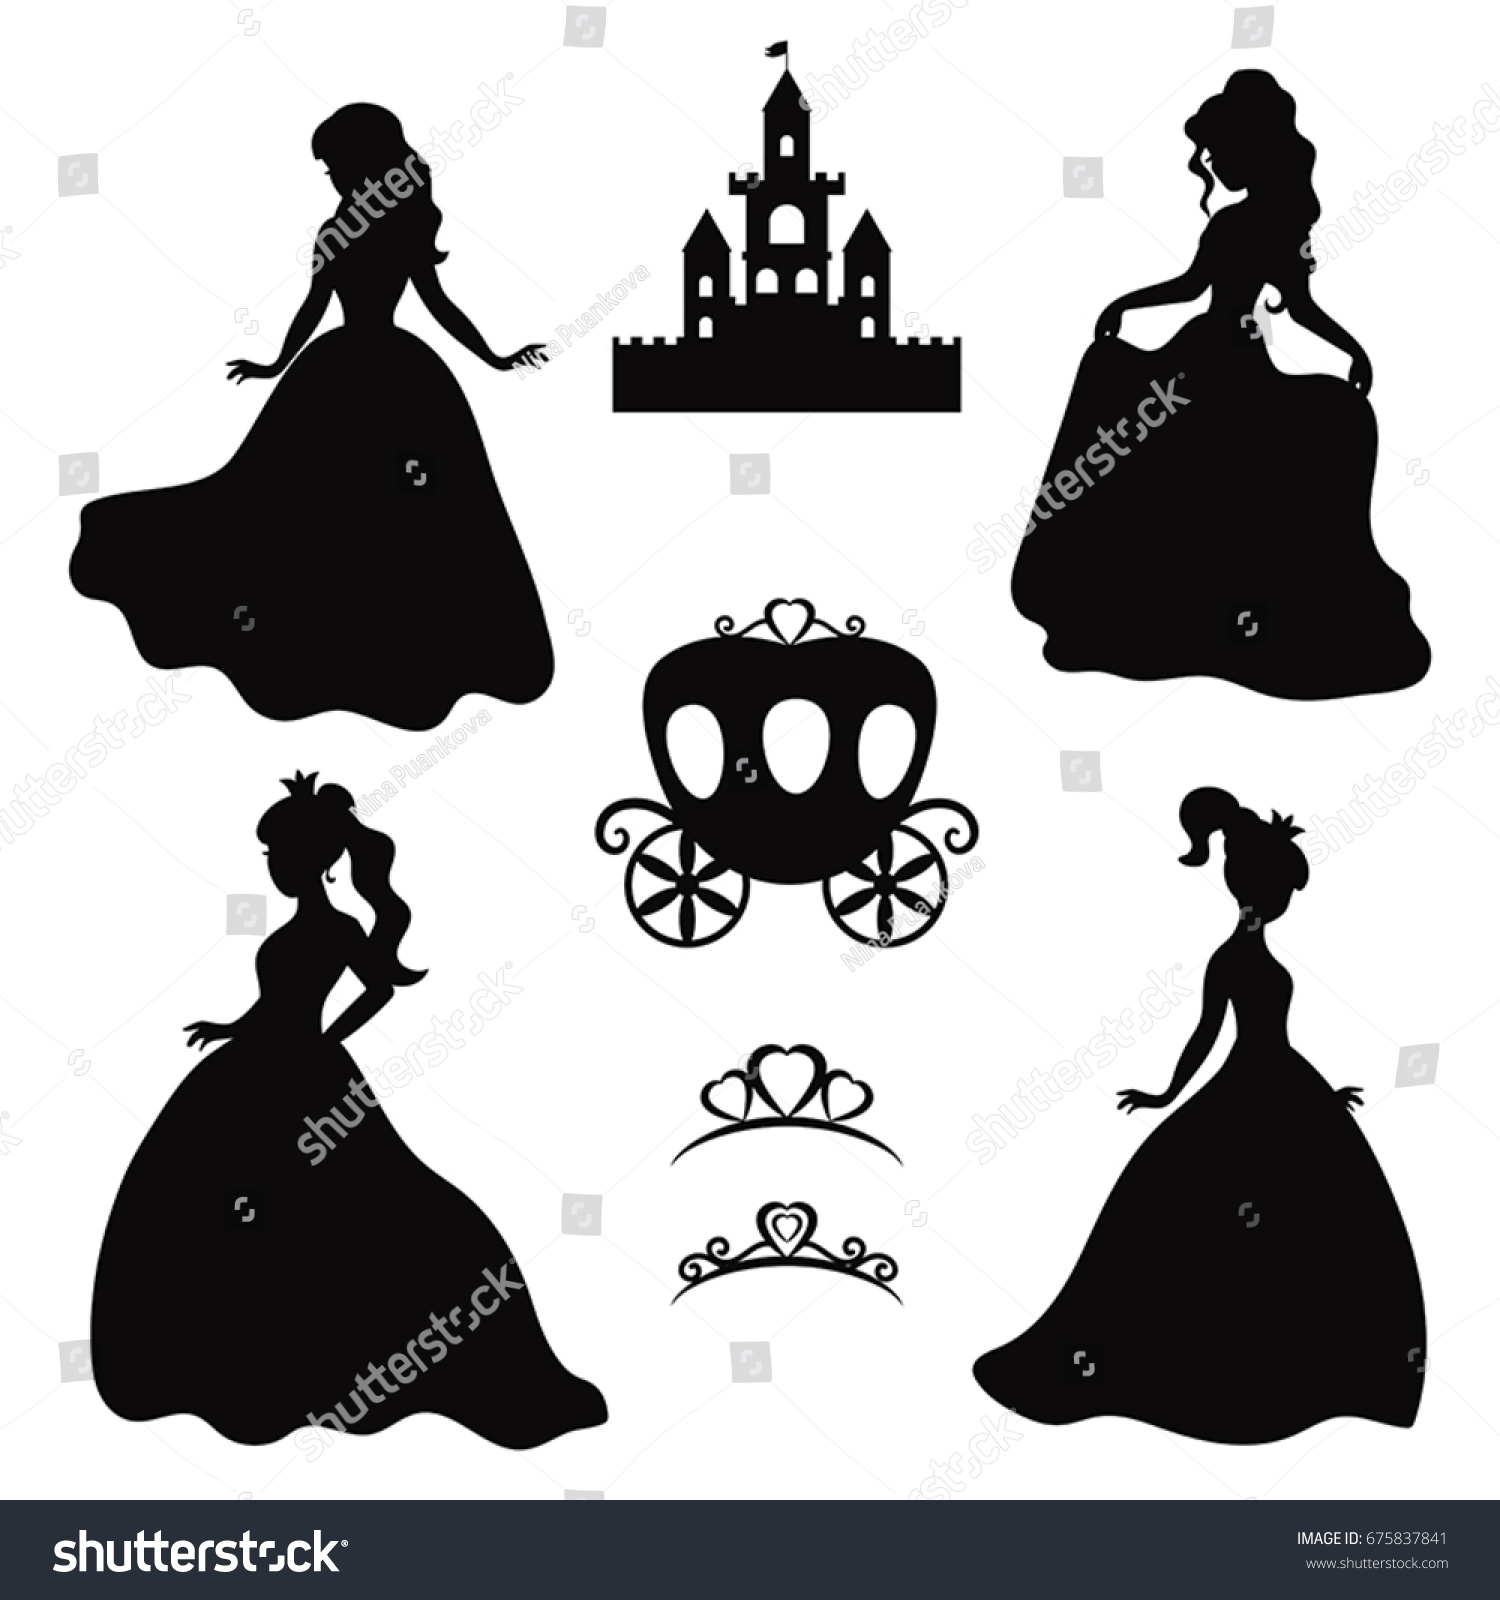 Set Silhouettes Princess On White Background Stock Vector 675837841 Shutterstock 